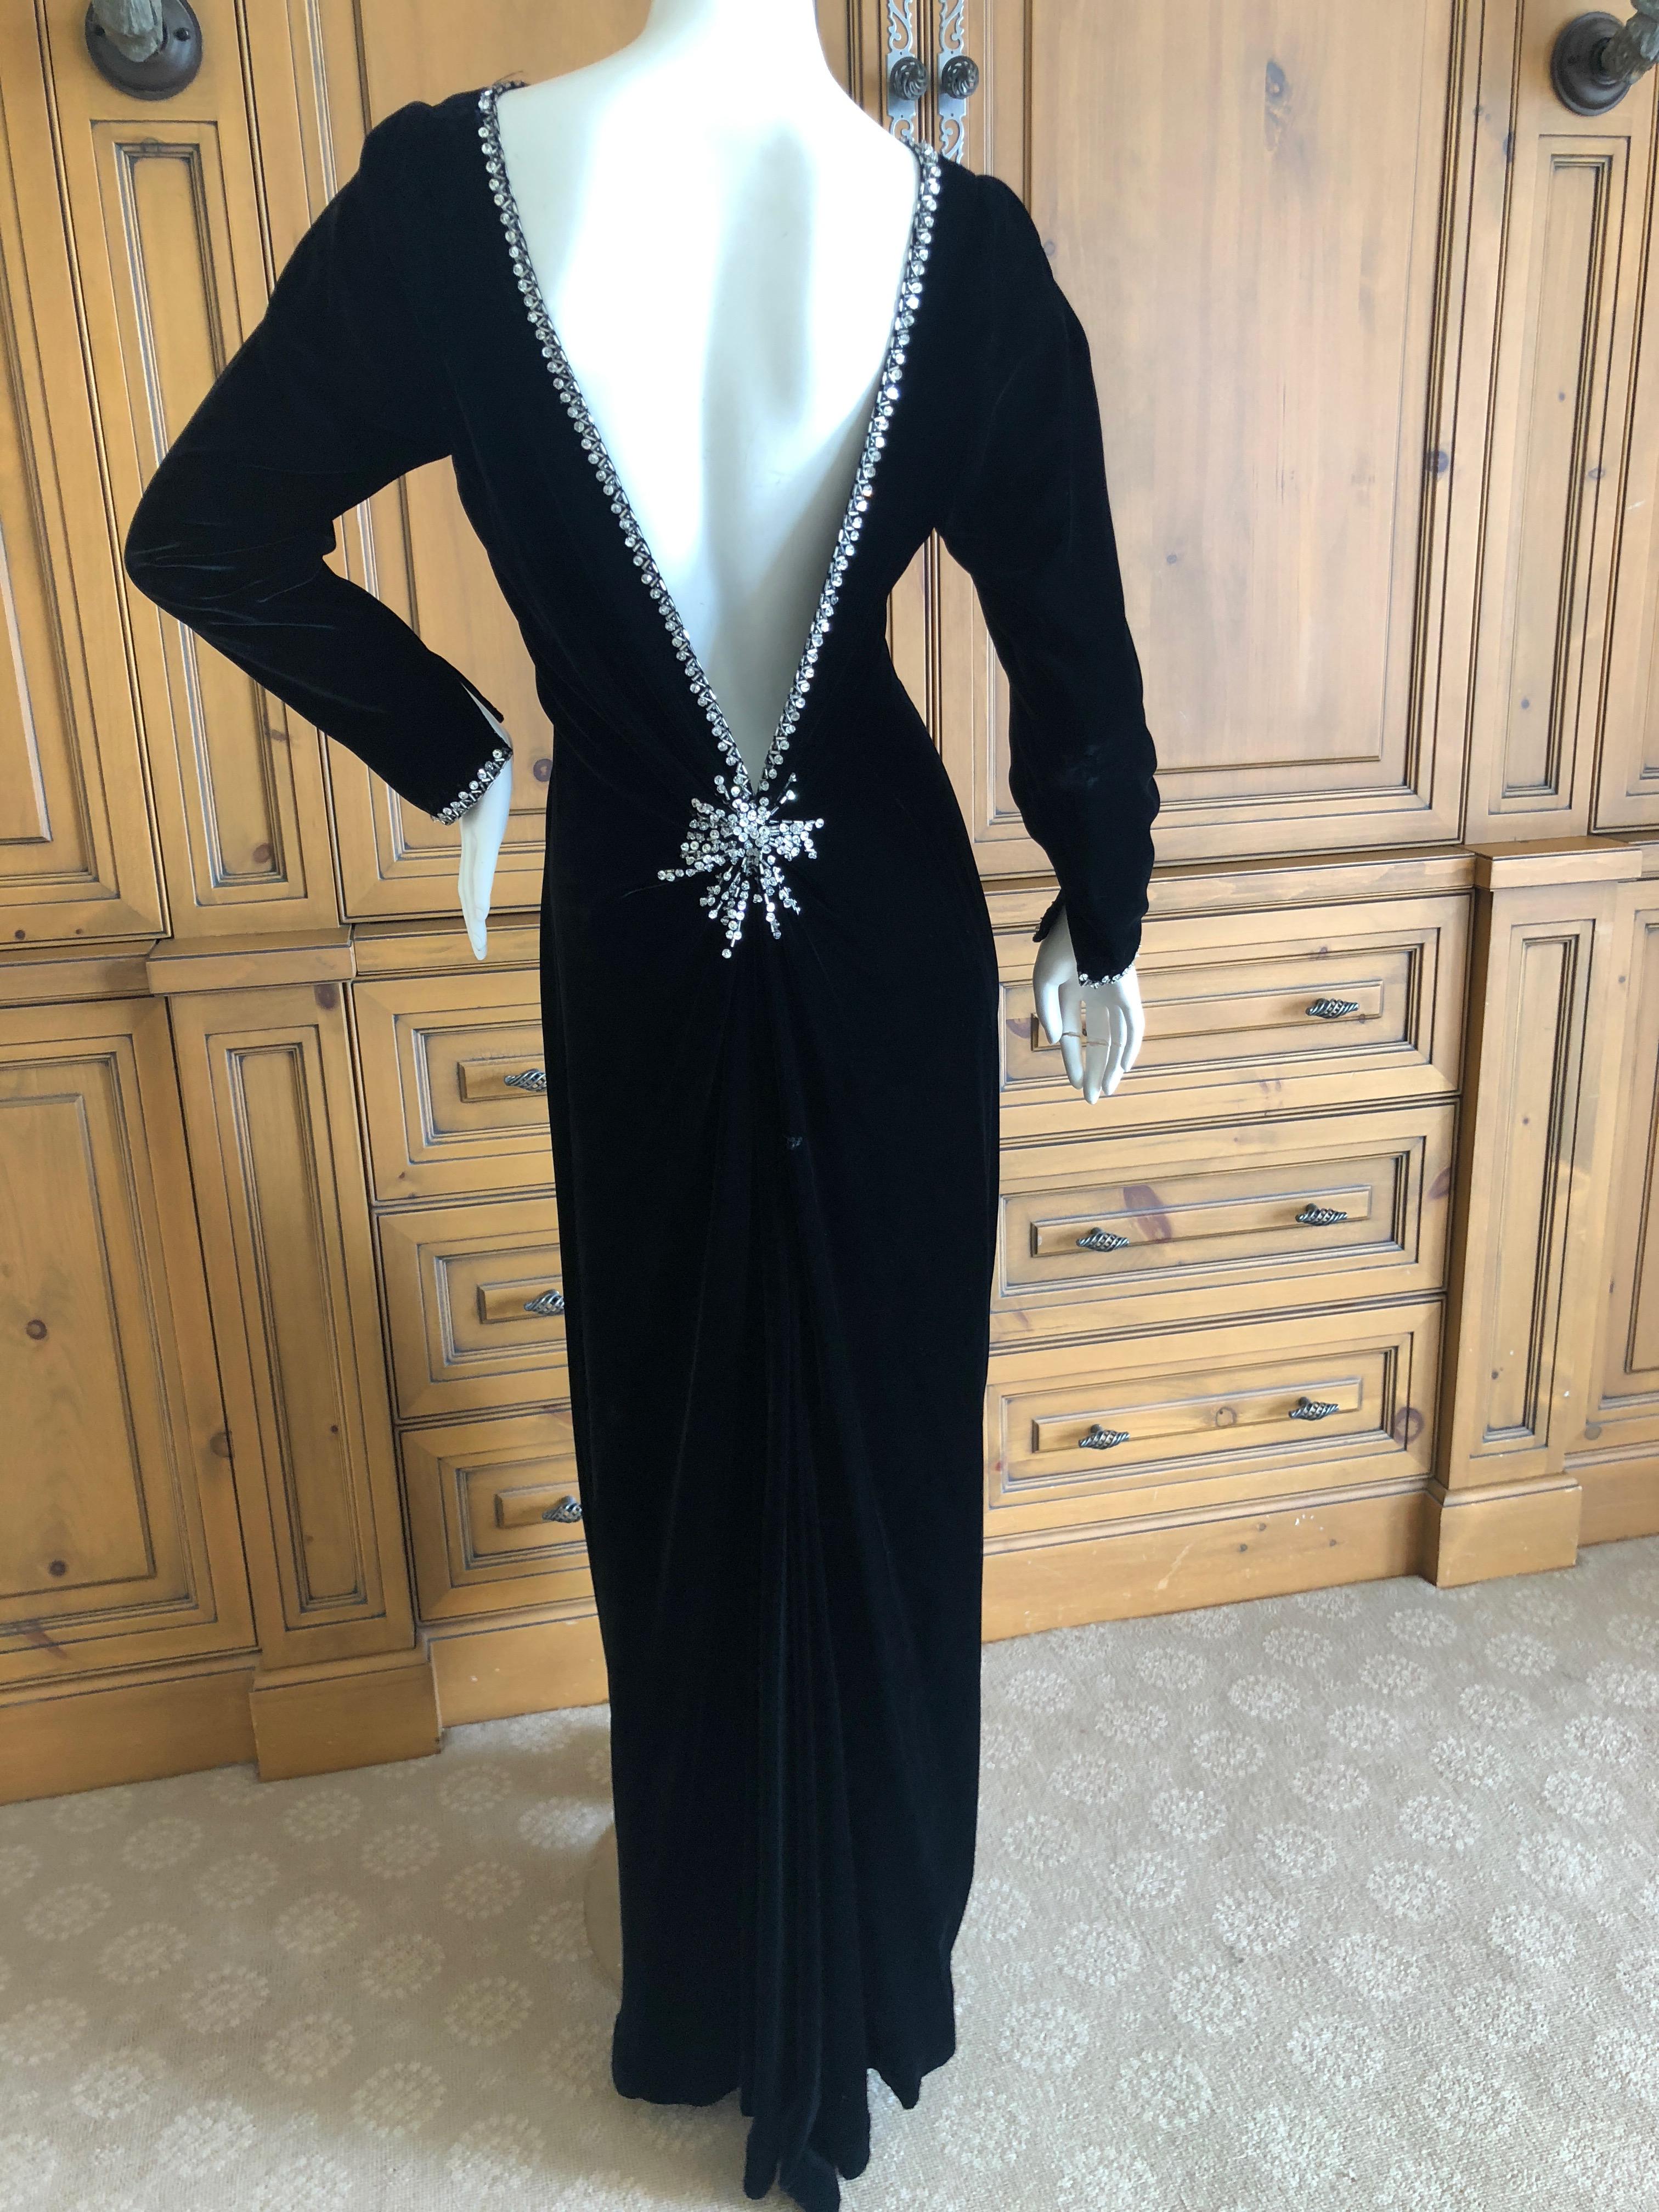 Fabrice for Amen Wardy 1980's Low Cut DIsco Era Silk Velvet Evening Dress.
Cut daringly low, but I don't know which is the front , or back, so I show it both ways.
Pure silk velvet with crystal trim. 
There is some bead loss at the collar, see last